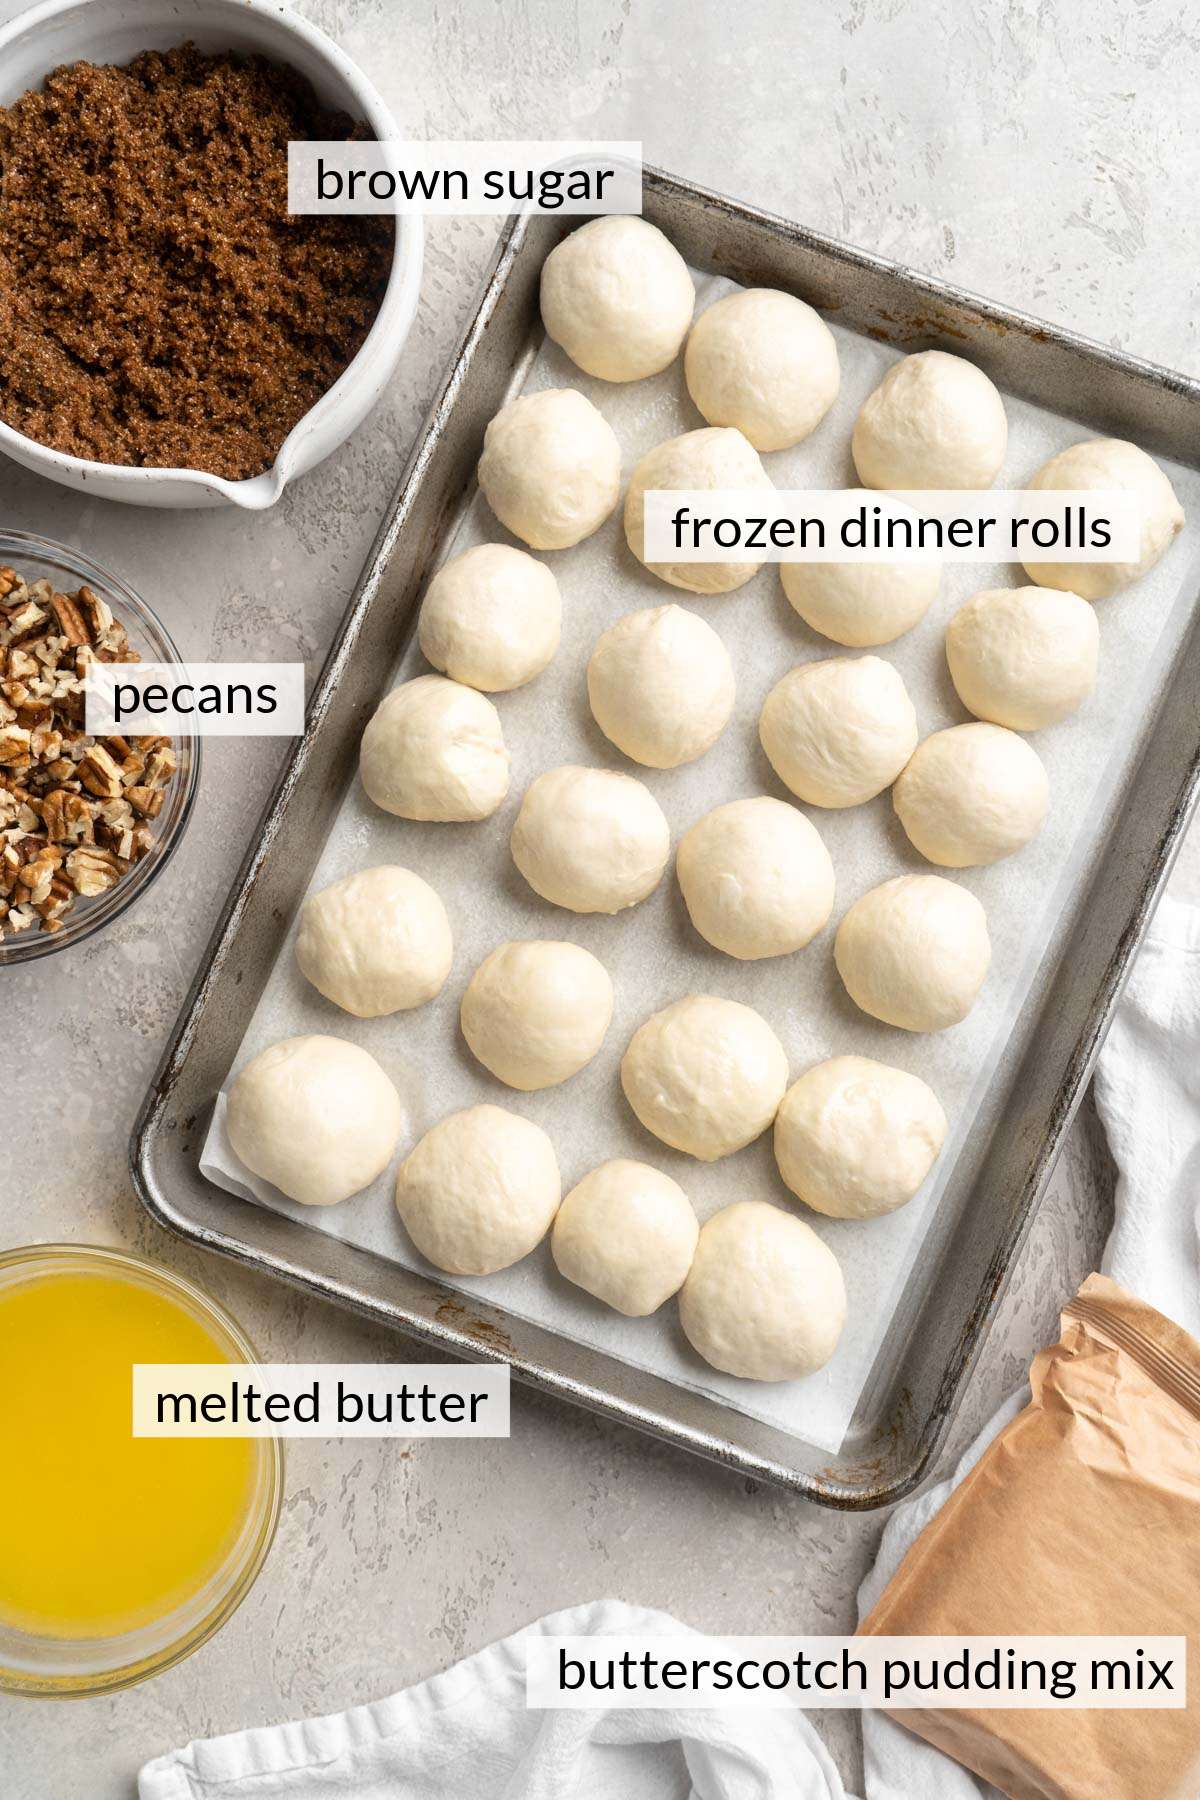 Frozen dinner rolls on a baking sheet pan near pudding mix, melted butter, brown sugar and chopped pecans.